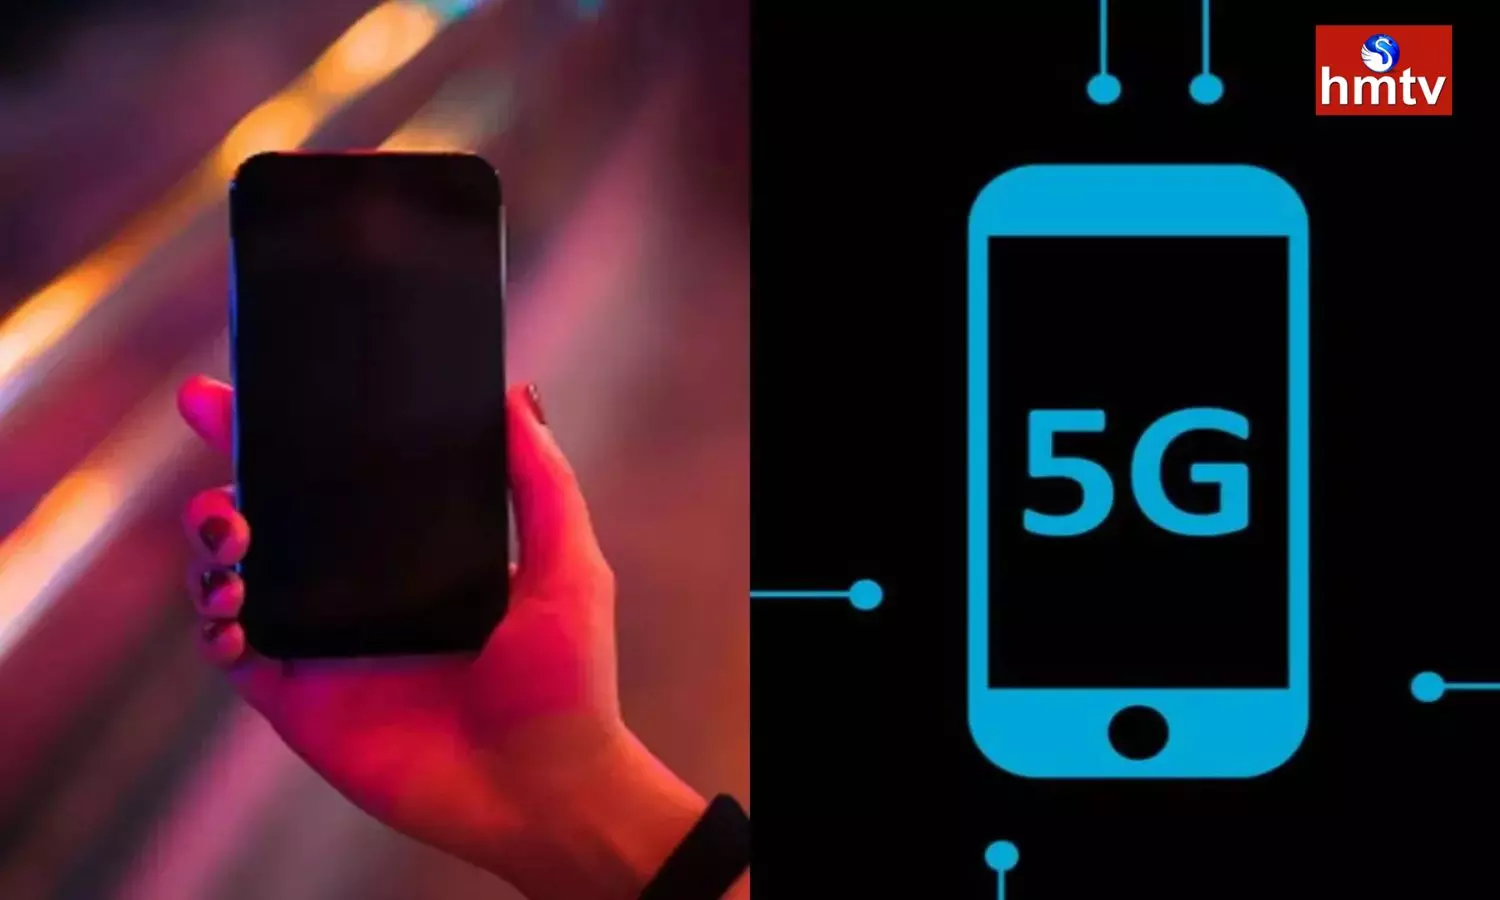 Mivi Company to Release Indias First 5G Smartphone 100% Made in India